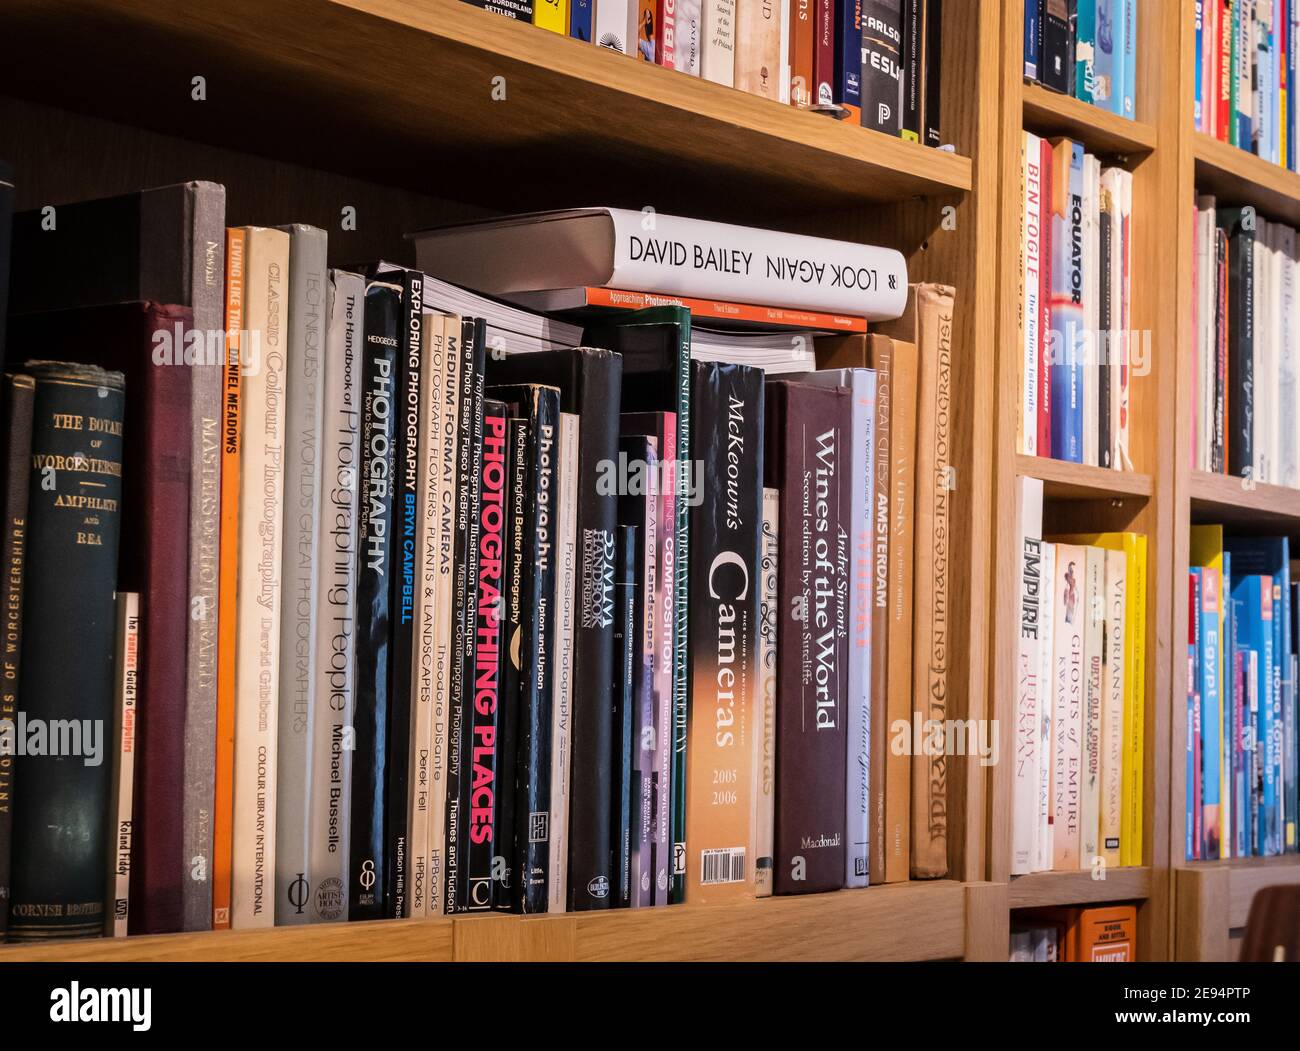 Book shelf with photography books Stock Photo